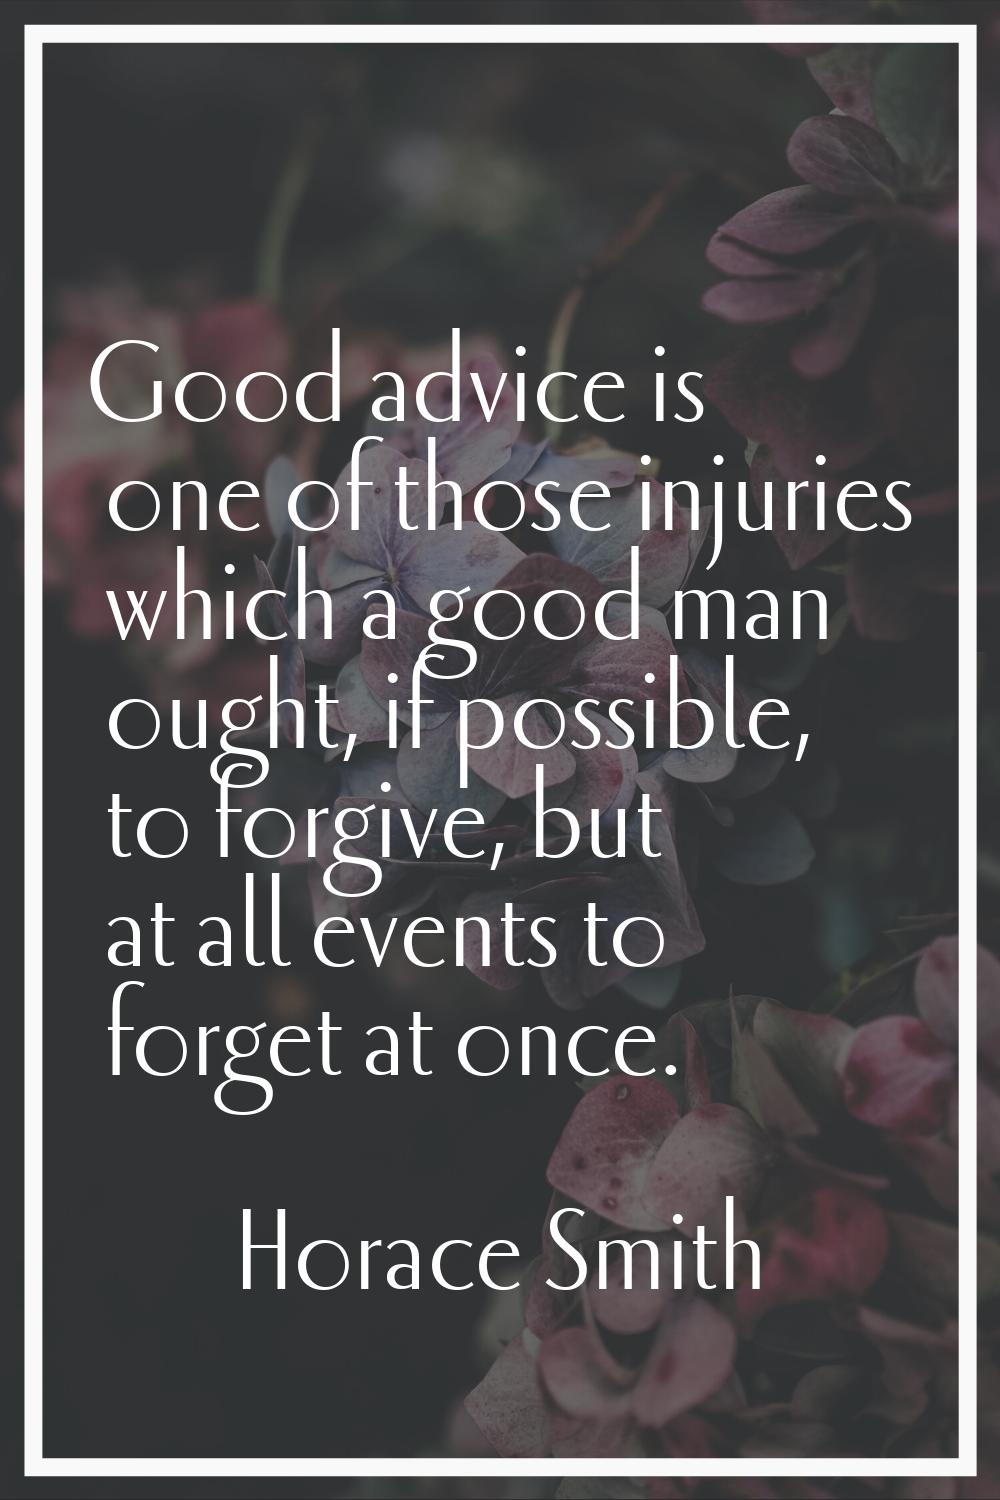 Good advice is one of those injuries which a good man ought, if possible, to forgive, but at all ev